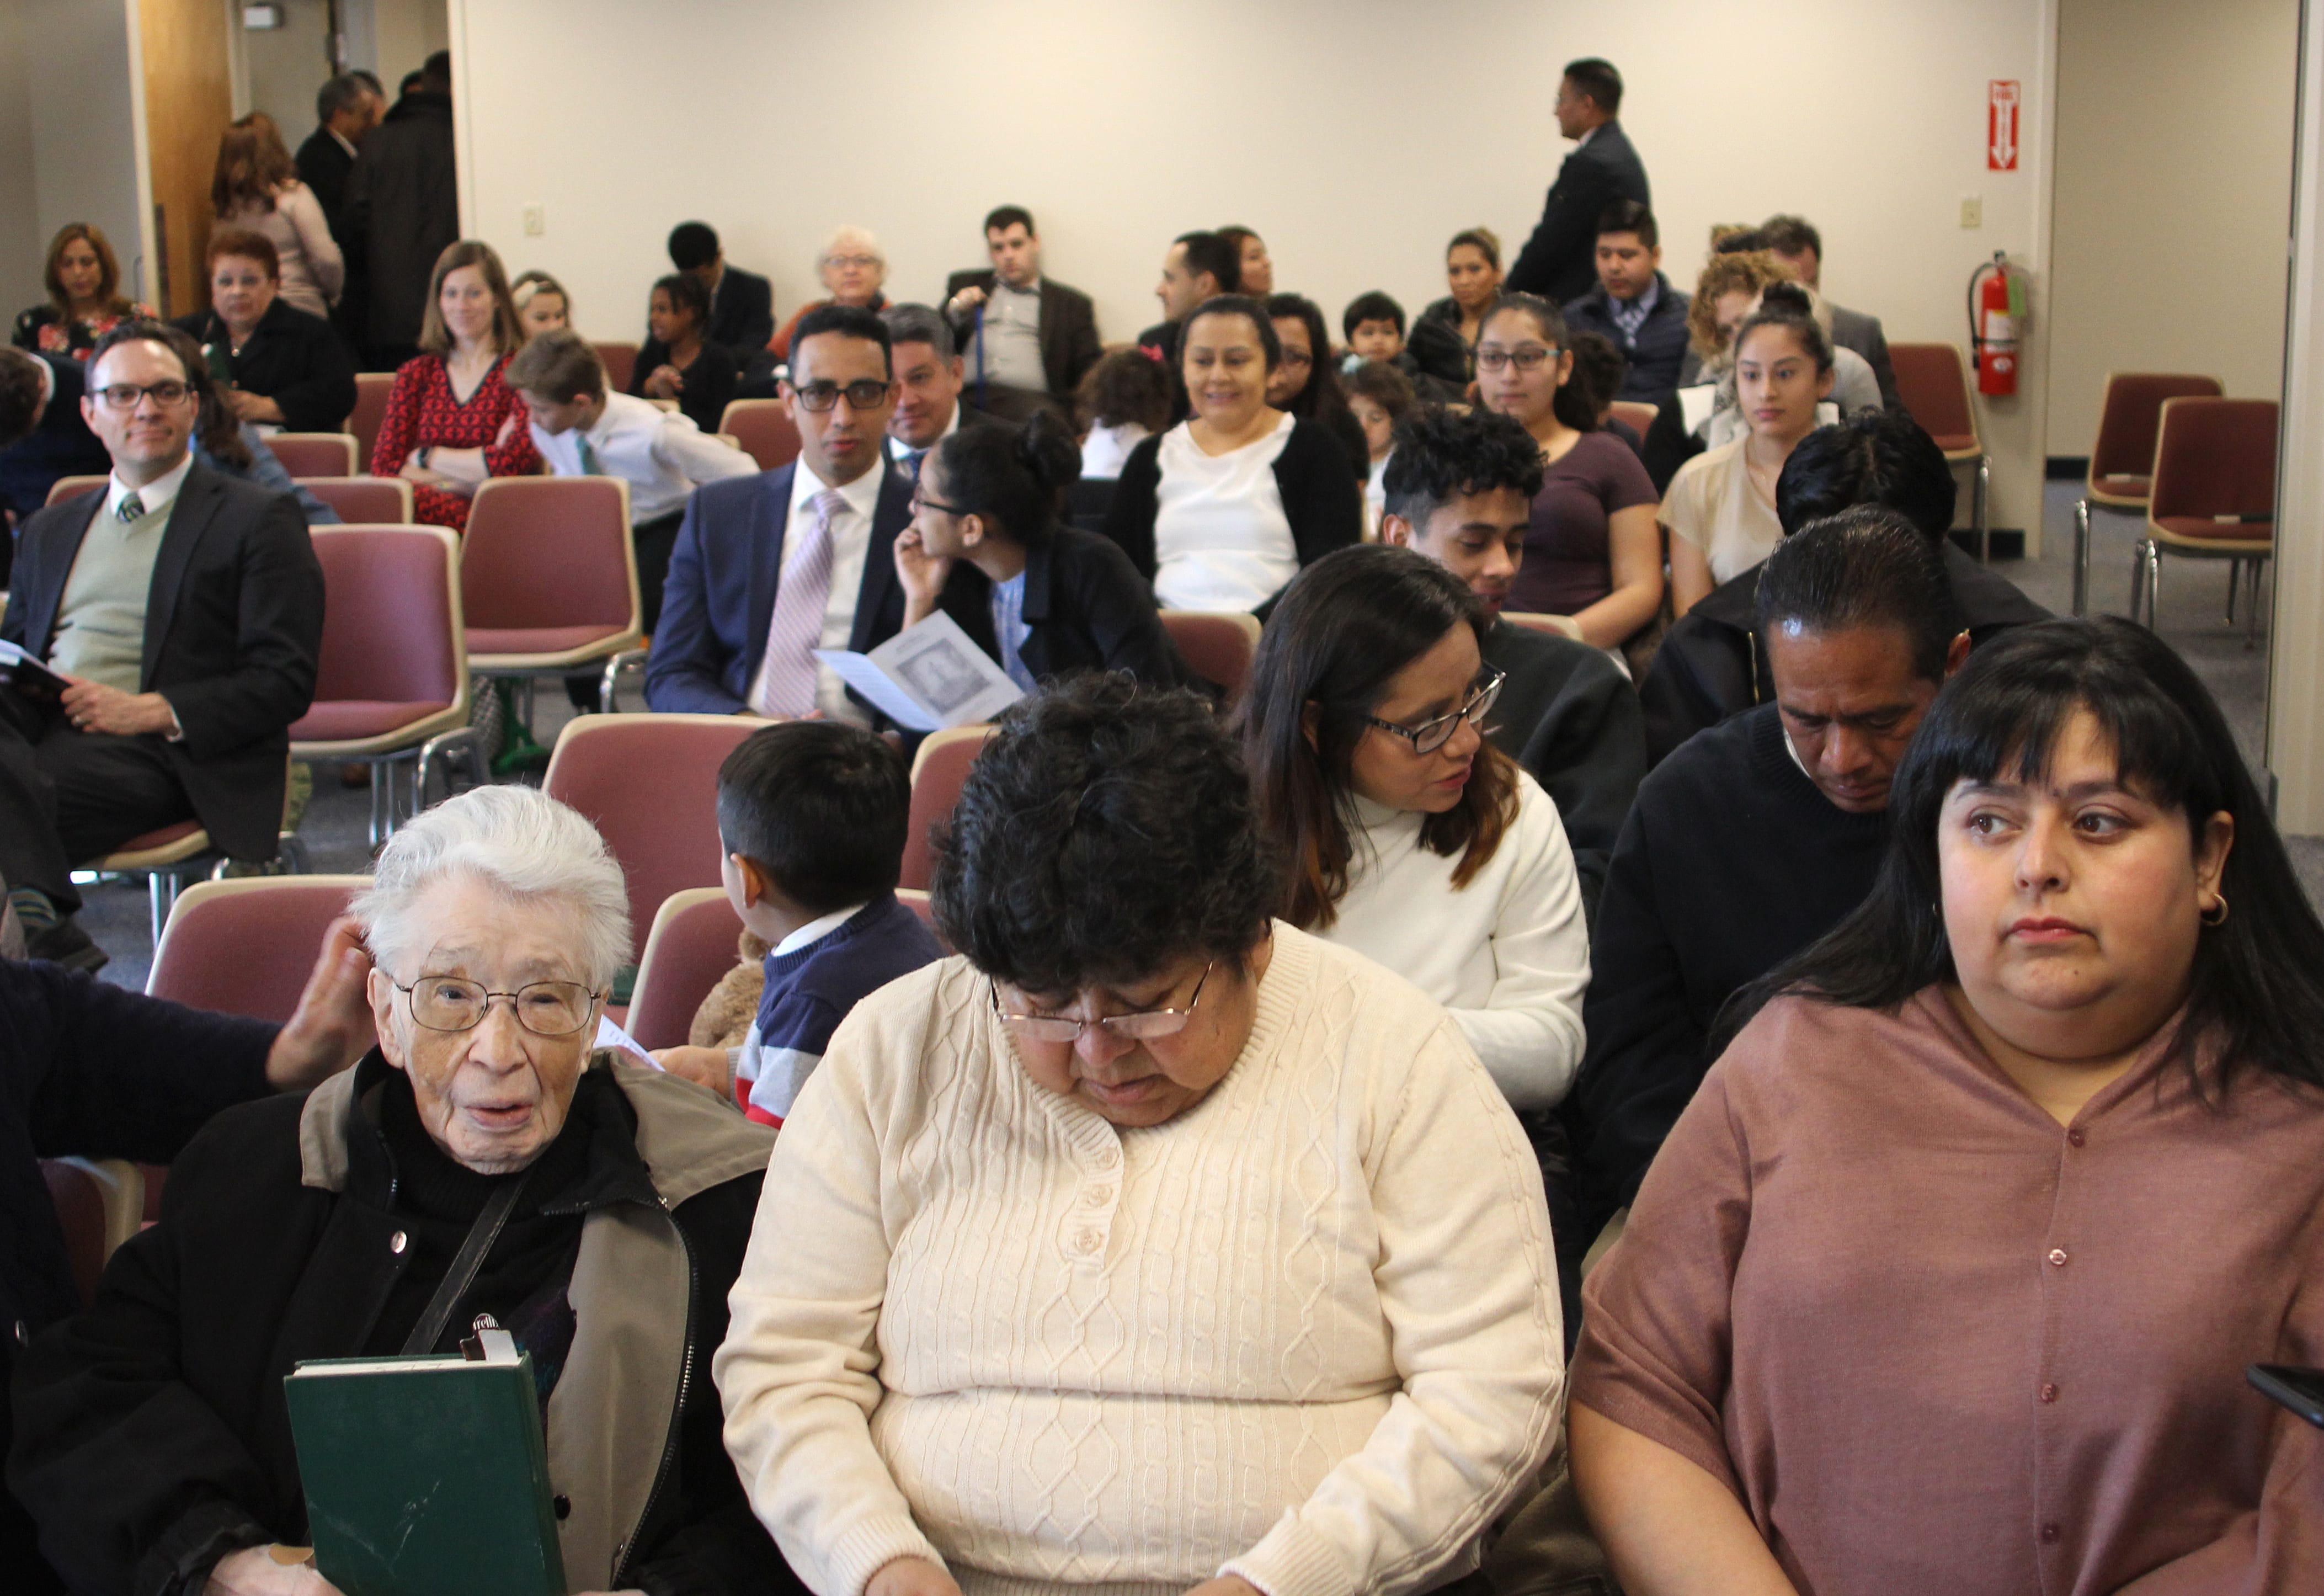 Parishioners at the new location of The Church of Jesus Christ of Latter-Day Saints on 15 Bubier road in Lynn.